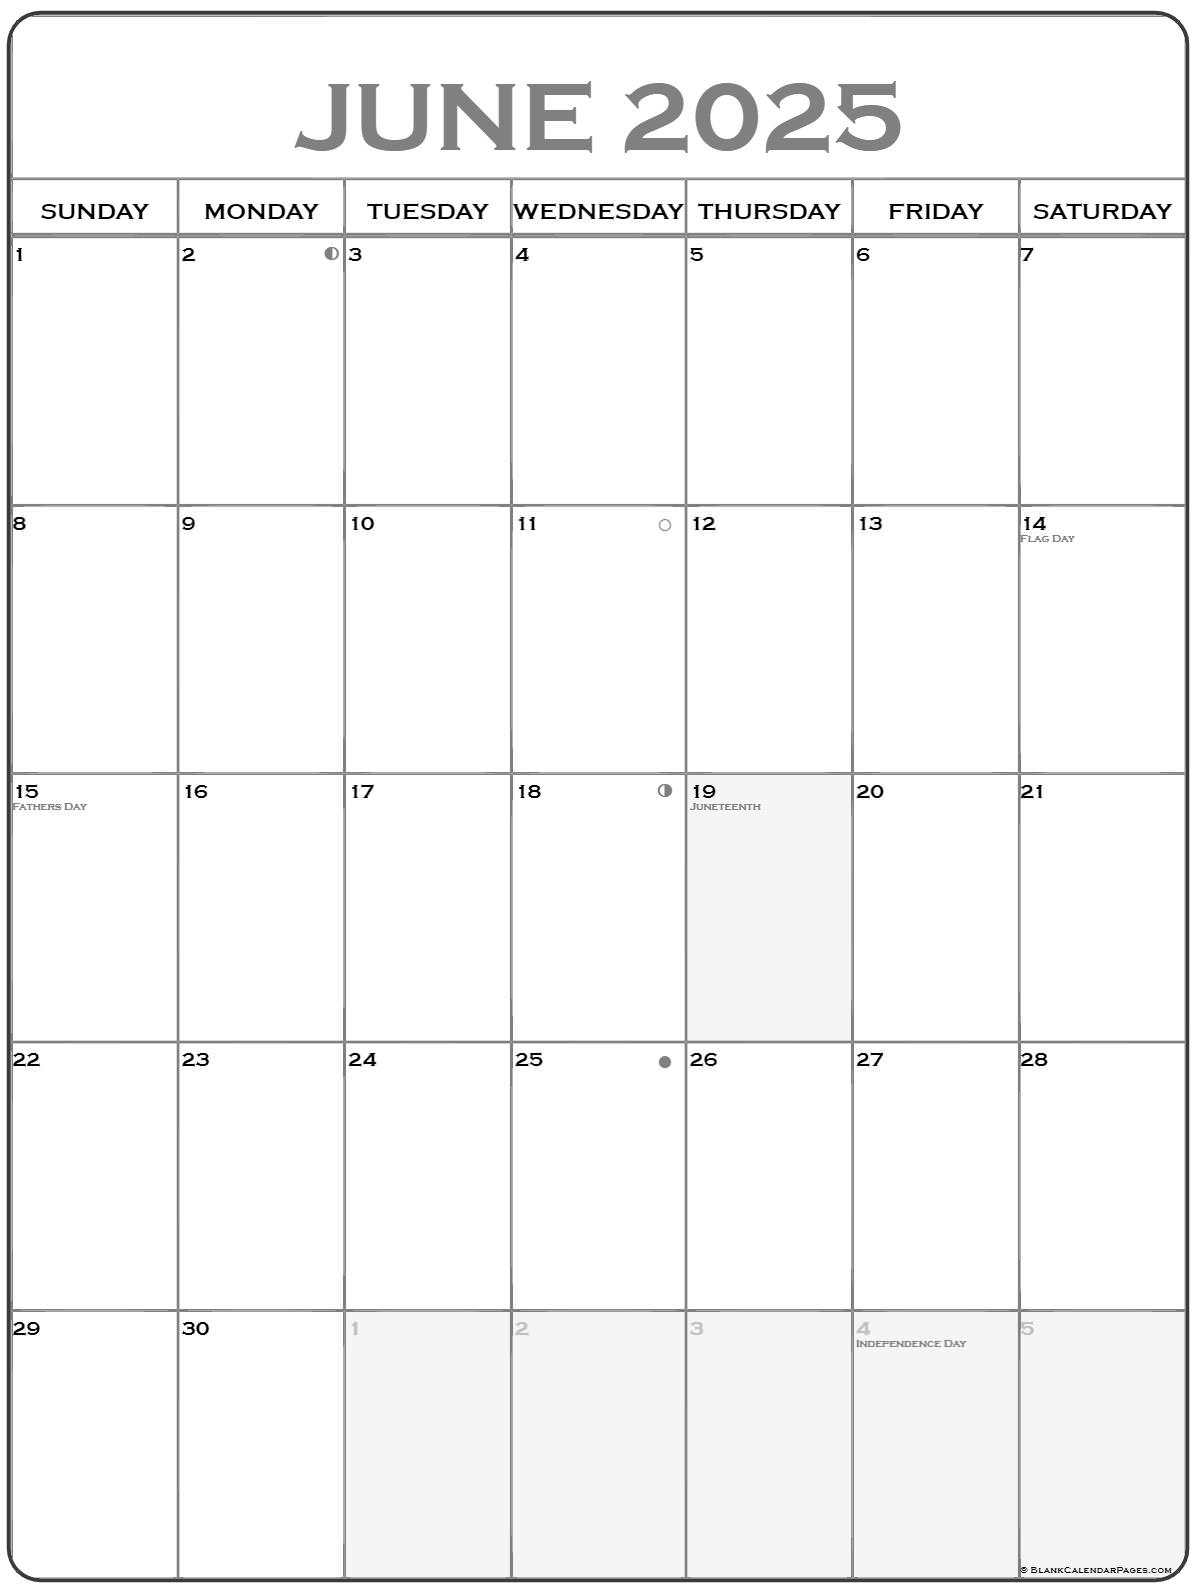 june-2025-calendar-templates-for-word-excel-and-pdf